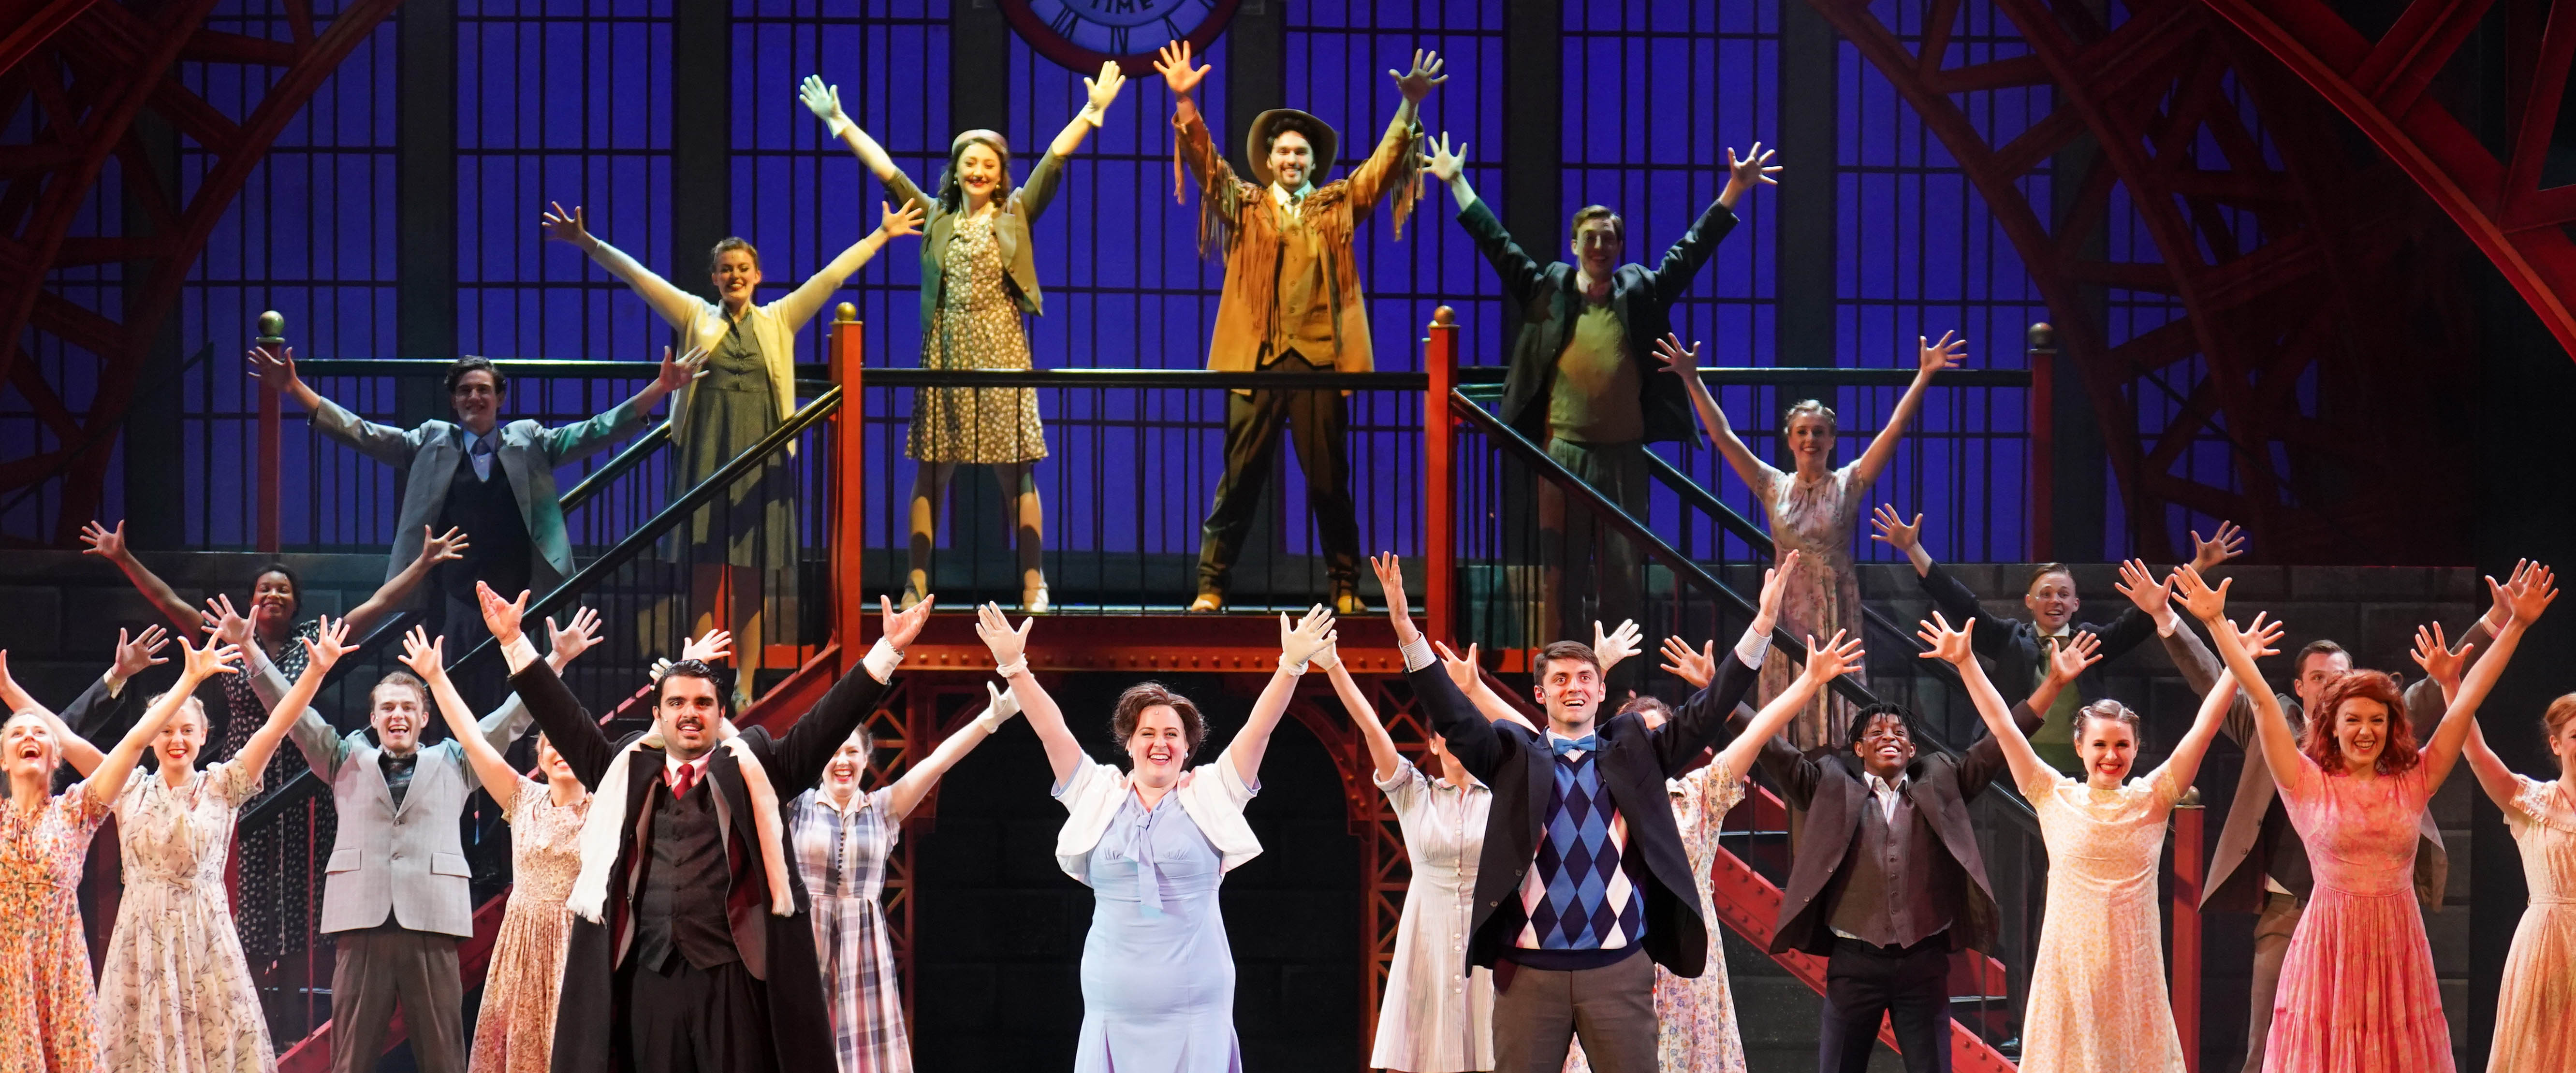 Belmont Musical Theatre perfroms: "42nd Street" at Belmont University